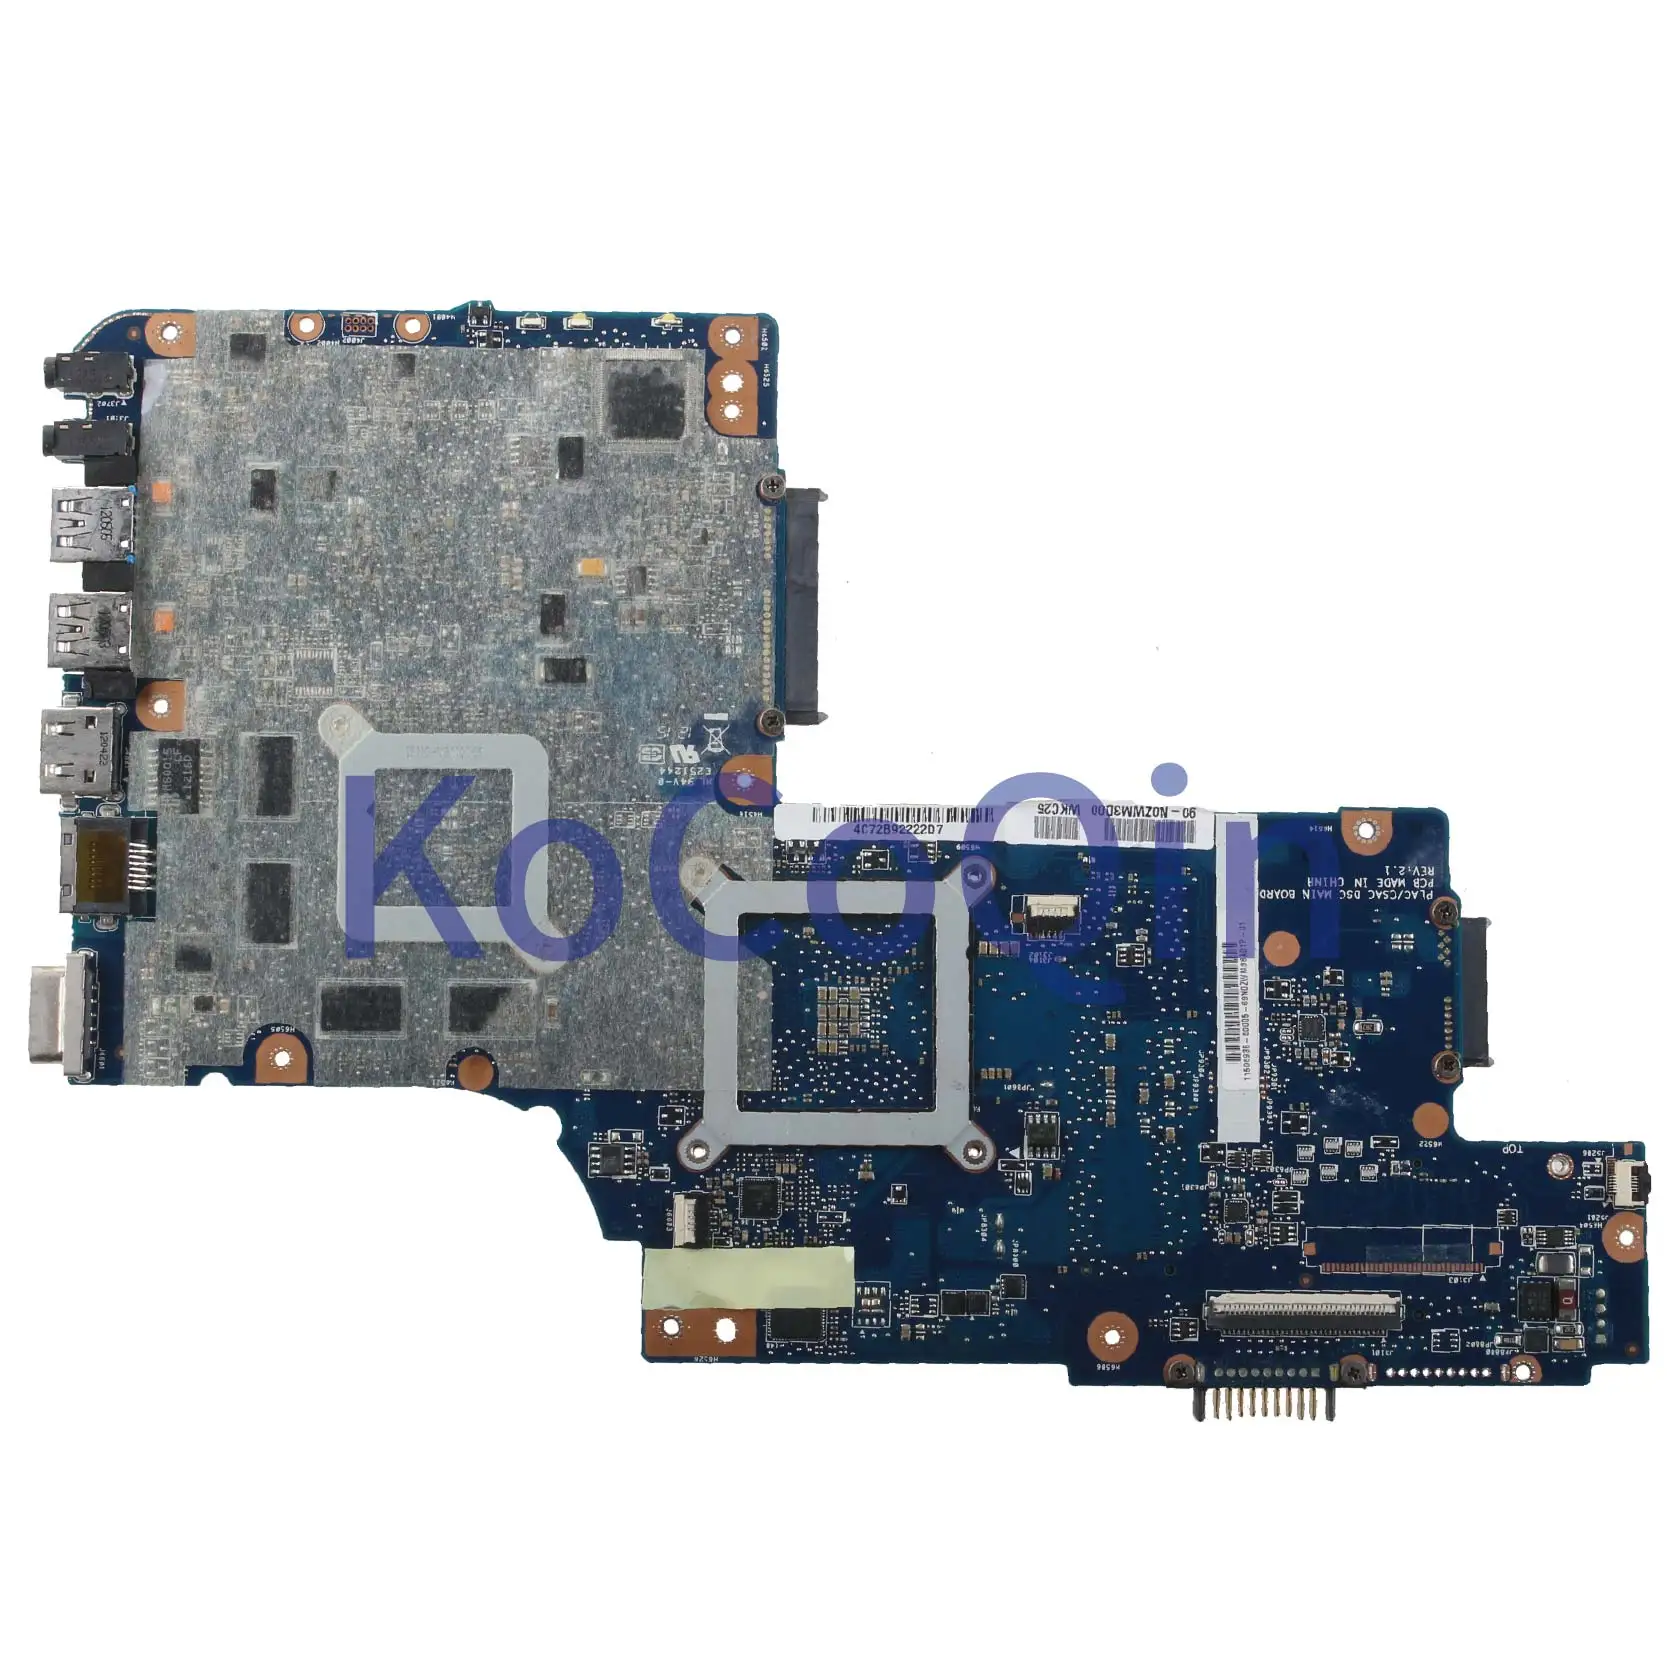 Cheap  KoCoQin Laptop motherboard For TOSHIBA Satellite C850D C855D Mainboard 216-0810028